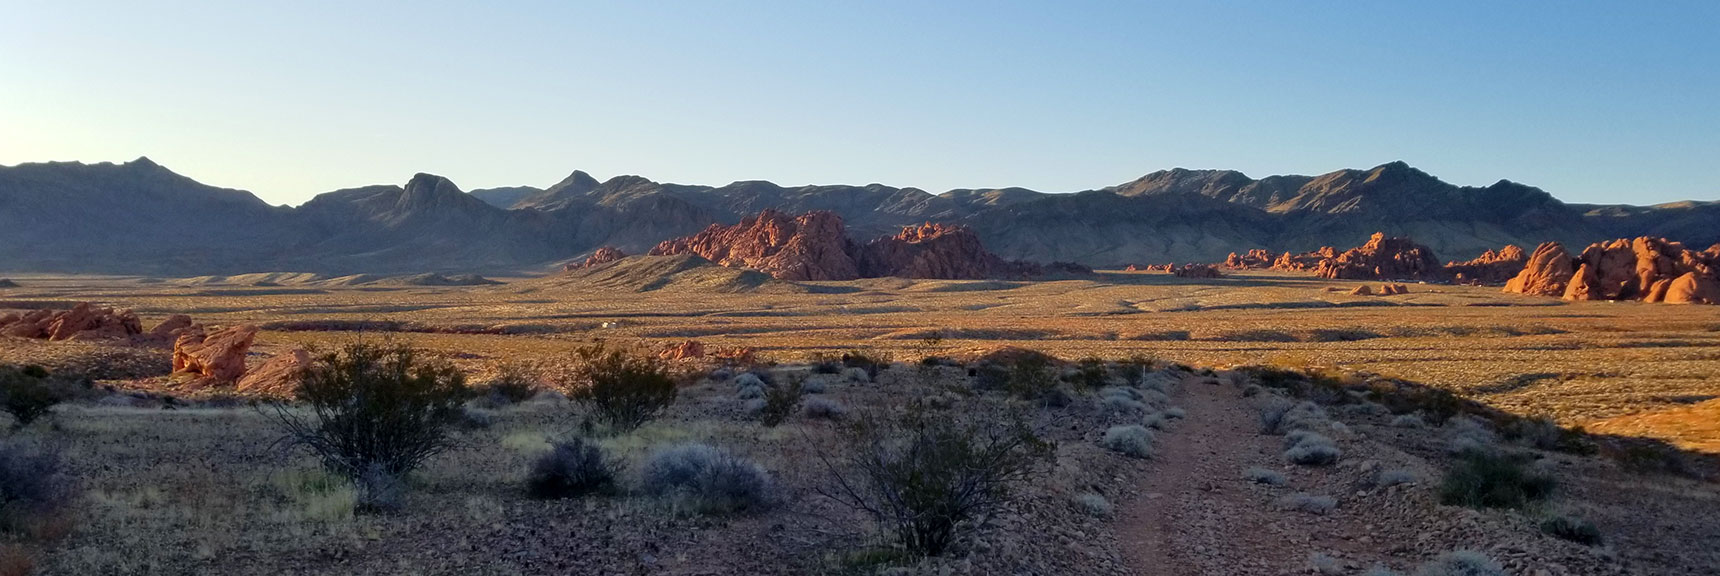 Looking Back Toward Atlatl Rock from the Pass at Prospect Trail in Valley of Fire State Park, Nevada